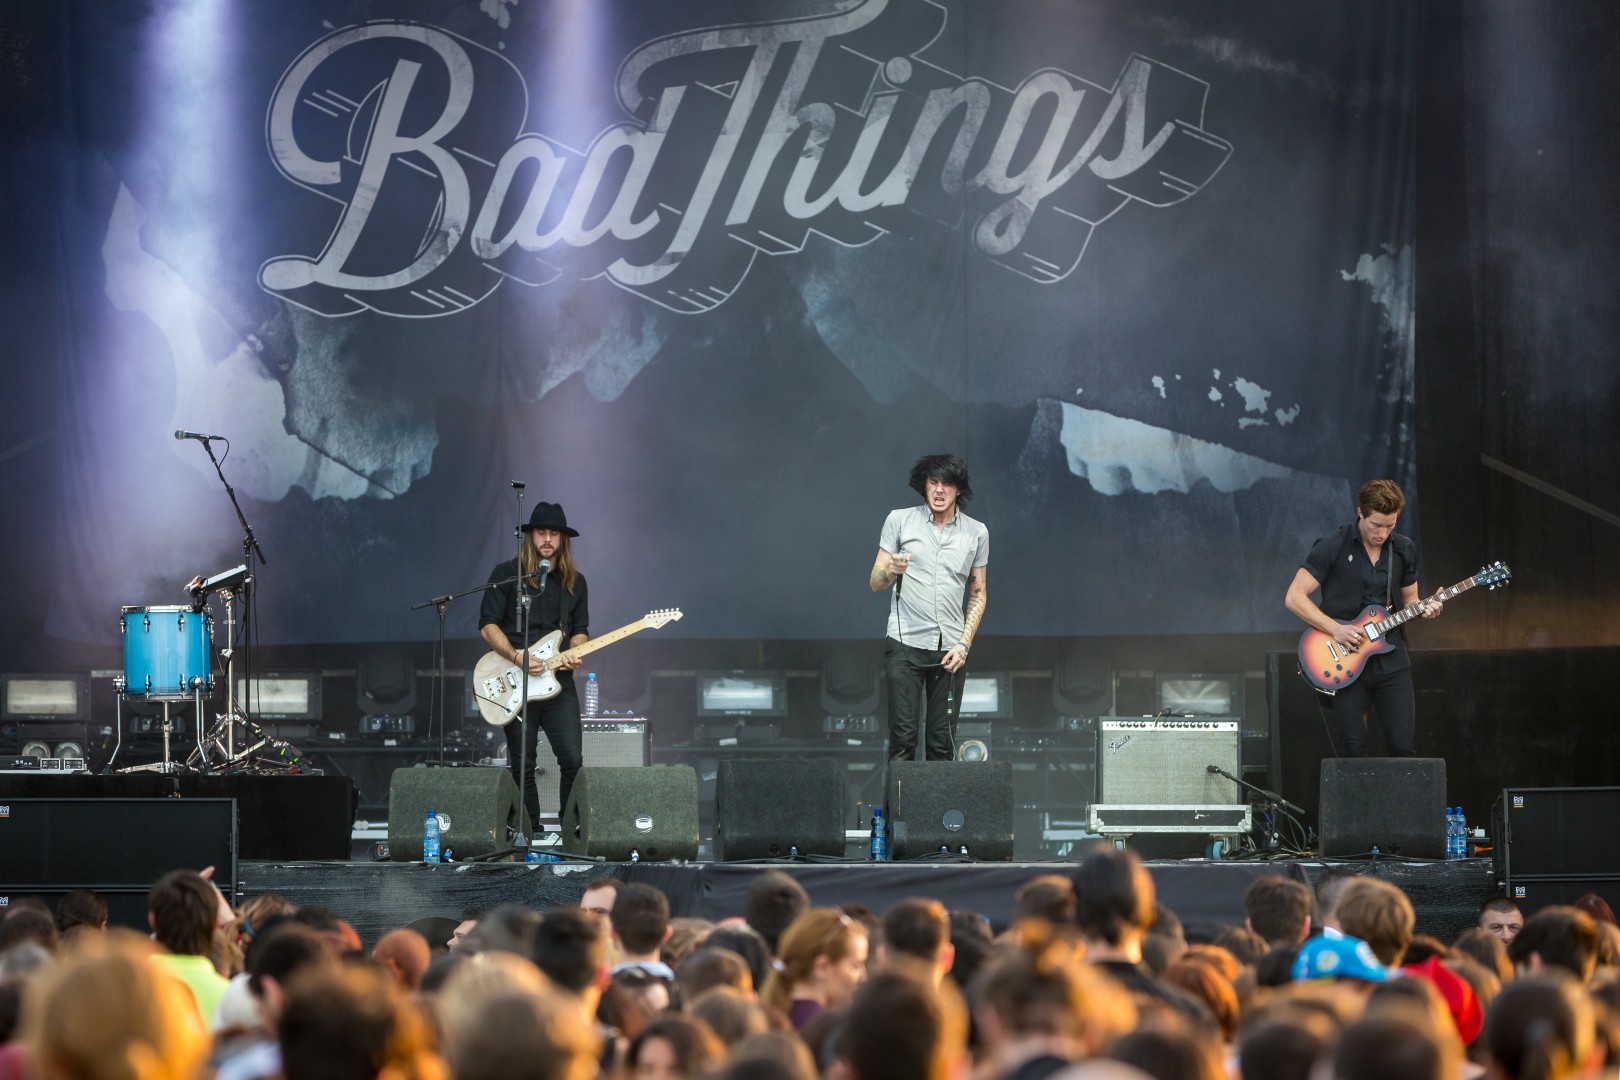 Bad Things at Romexpo in Bucharest on July 5, 2014 (fdef548889)